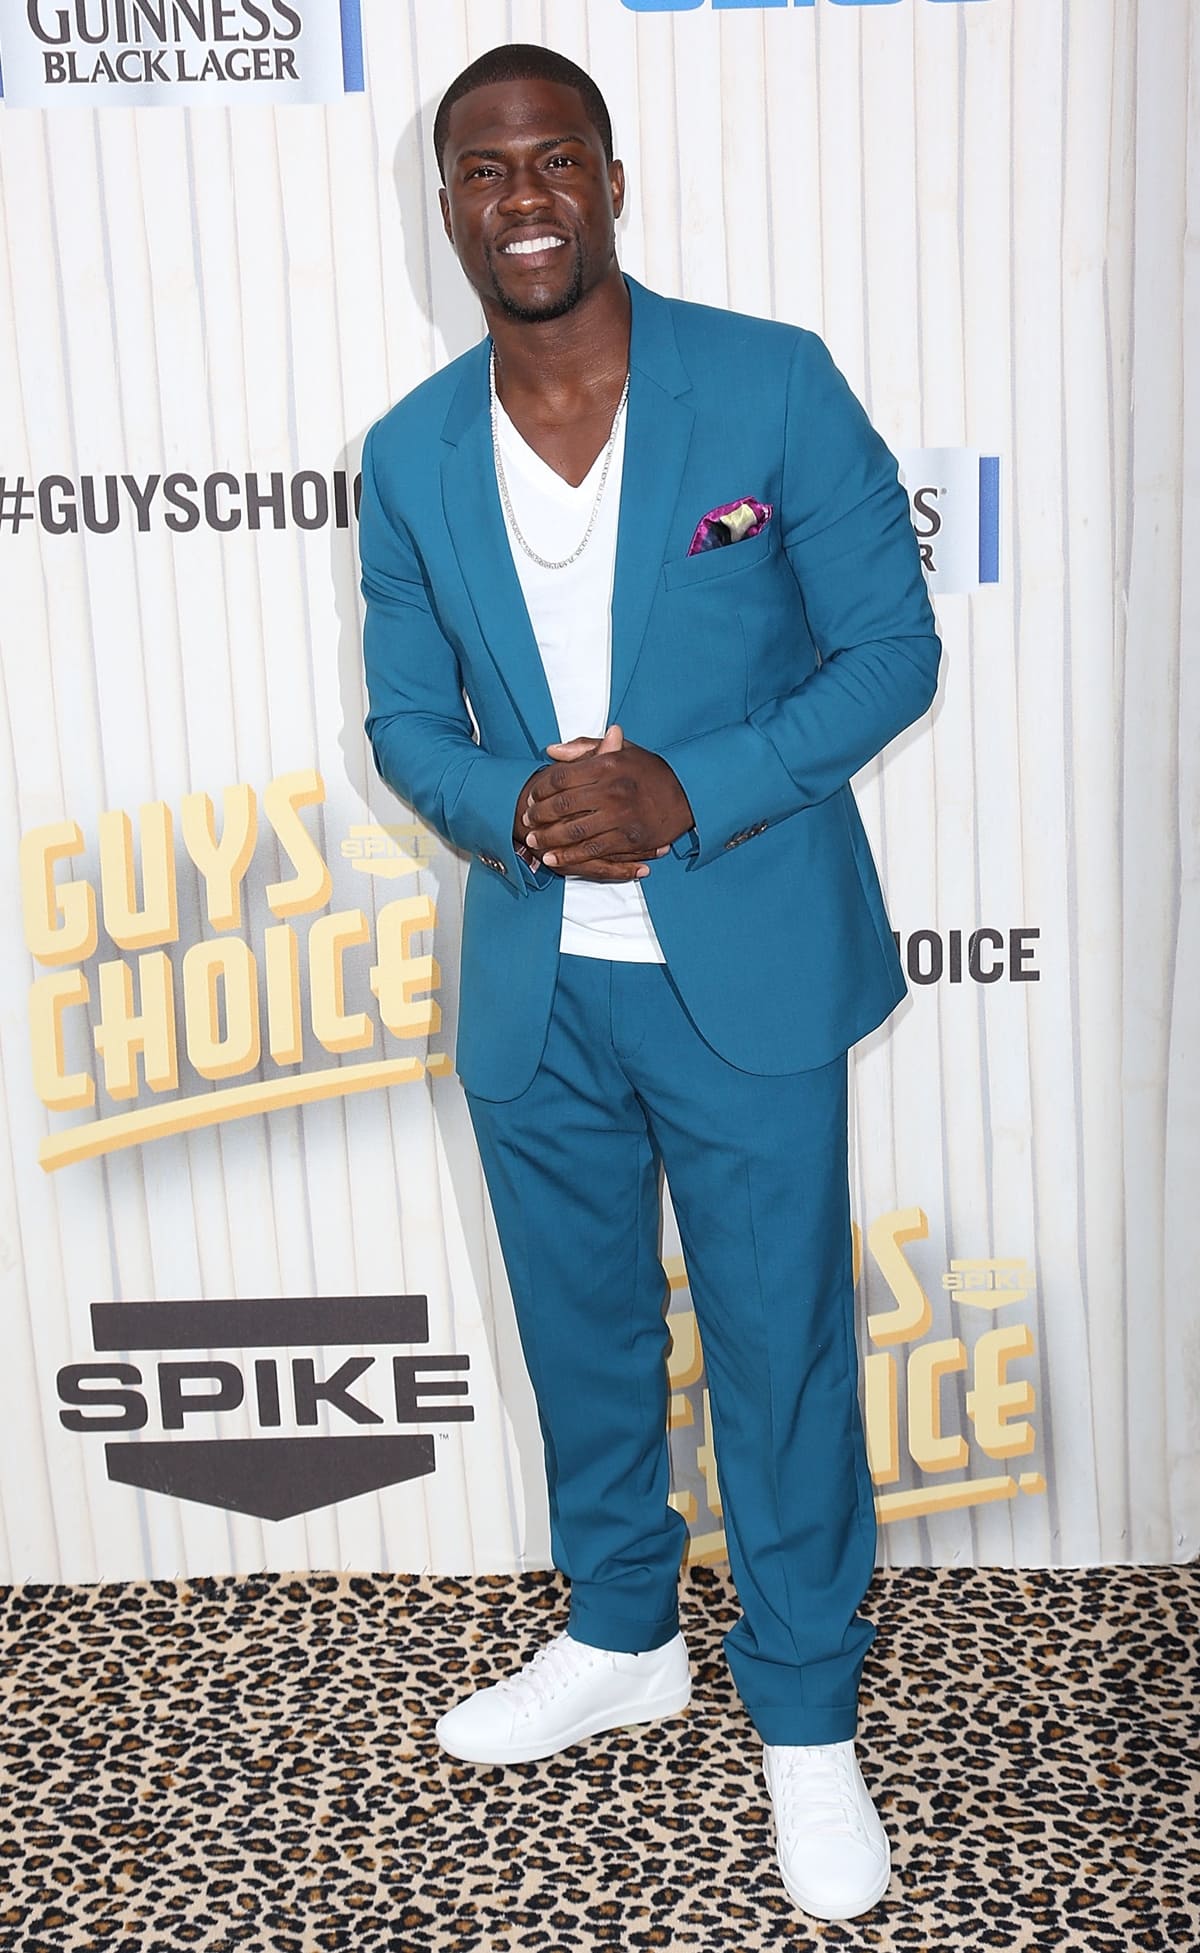 Kevin Hart measures 5ft 2 ½ (158.8 cm) but claims his short height has some advantages